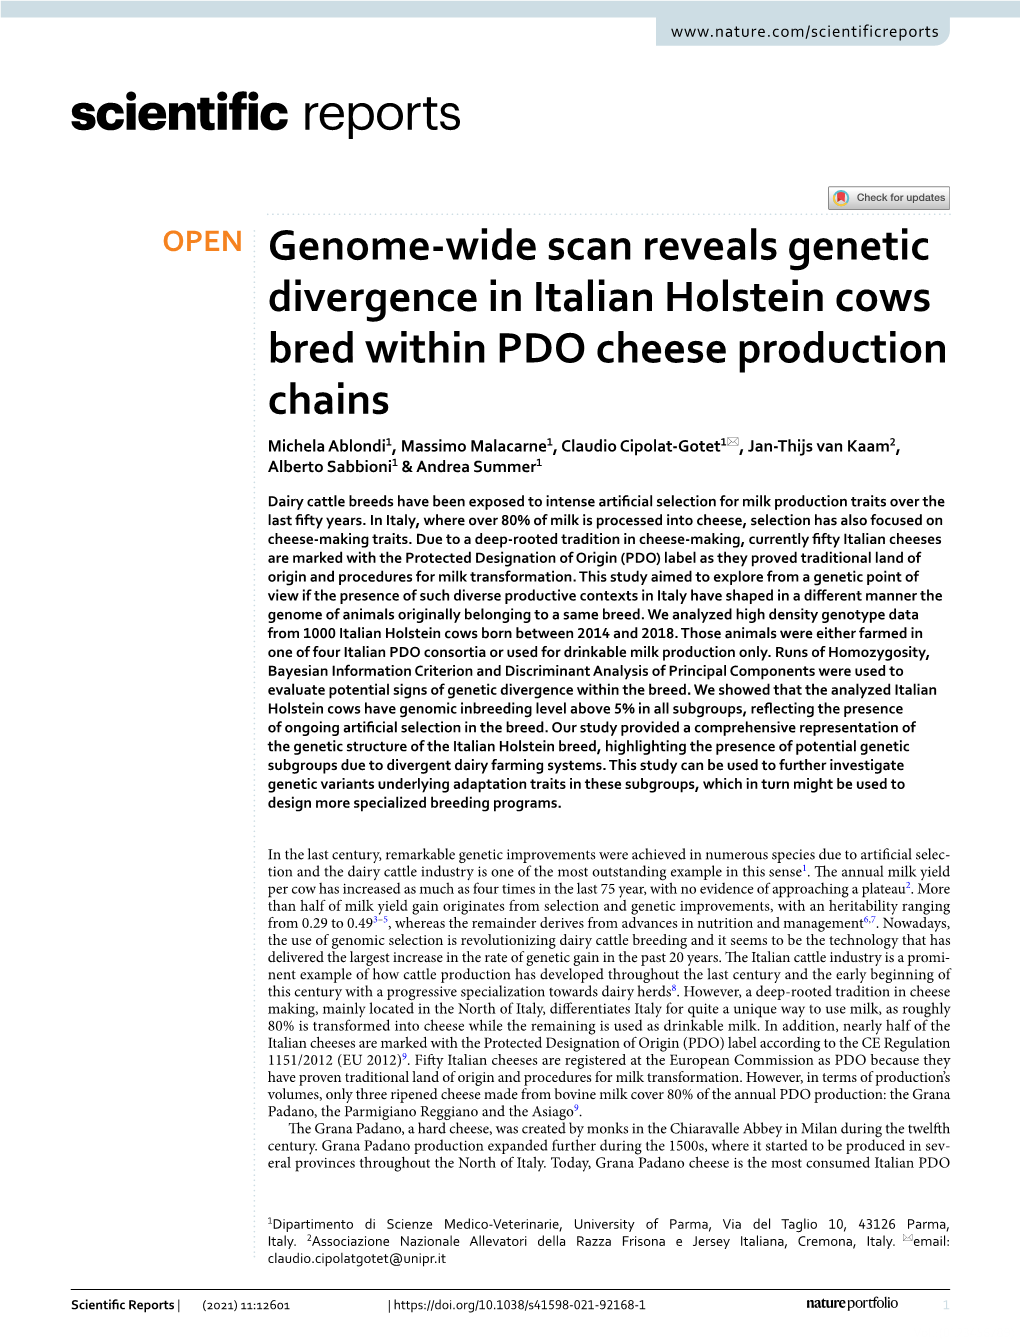 Genome-Wide Scan Reveals Genetic Divergence in Italian Holstein Cows Bred Within PDO Cheese Production Chains